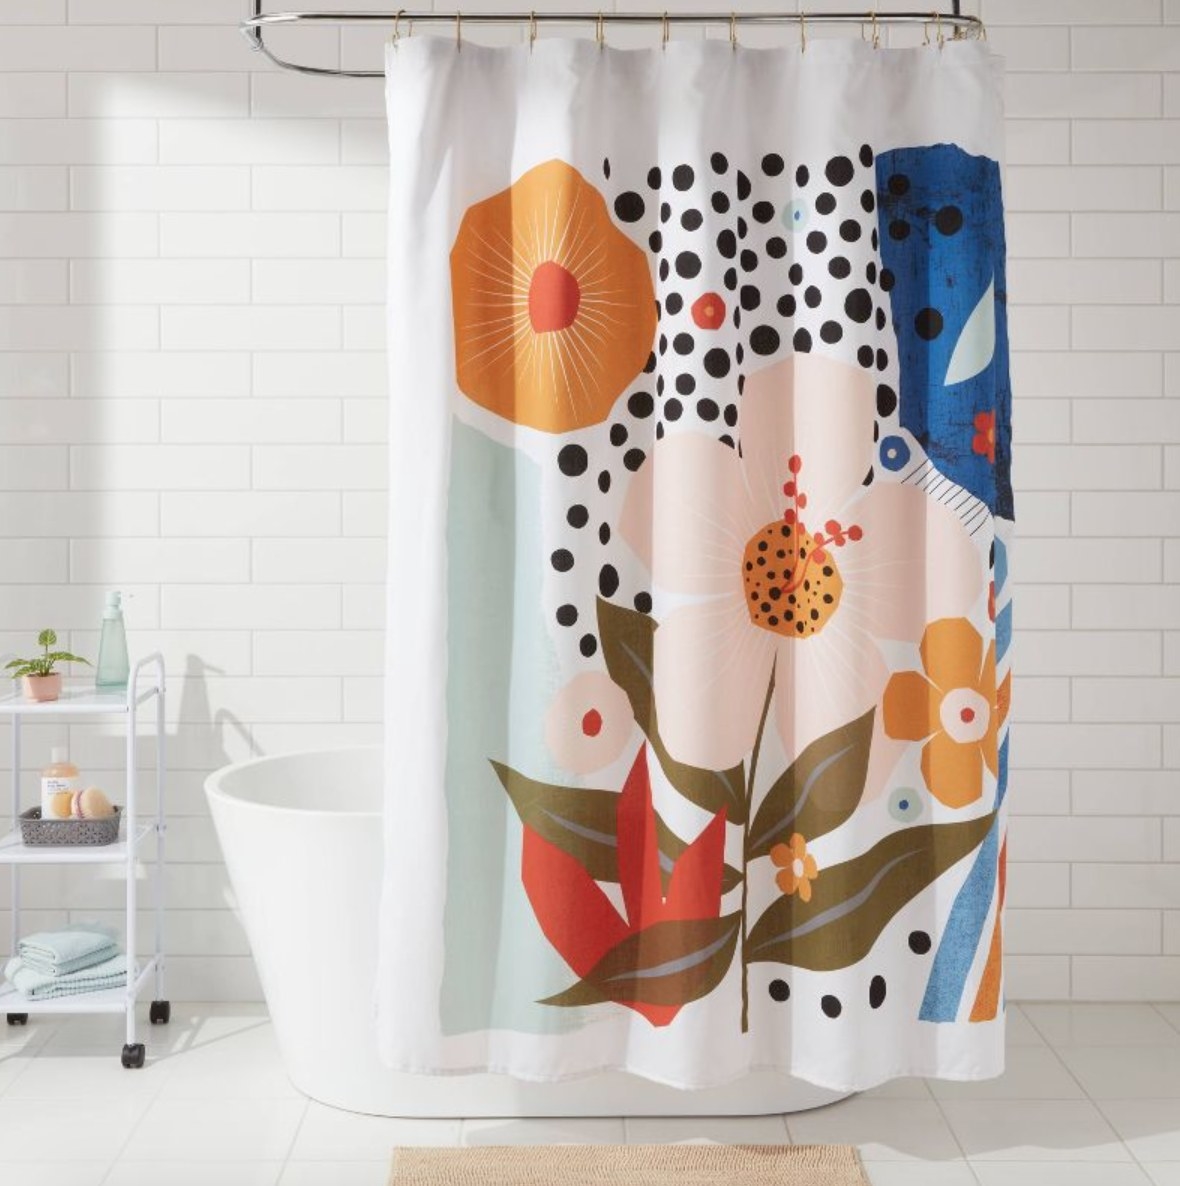 the bright multicolor floral shower curtain